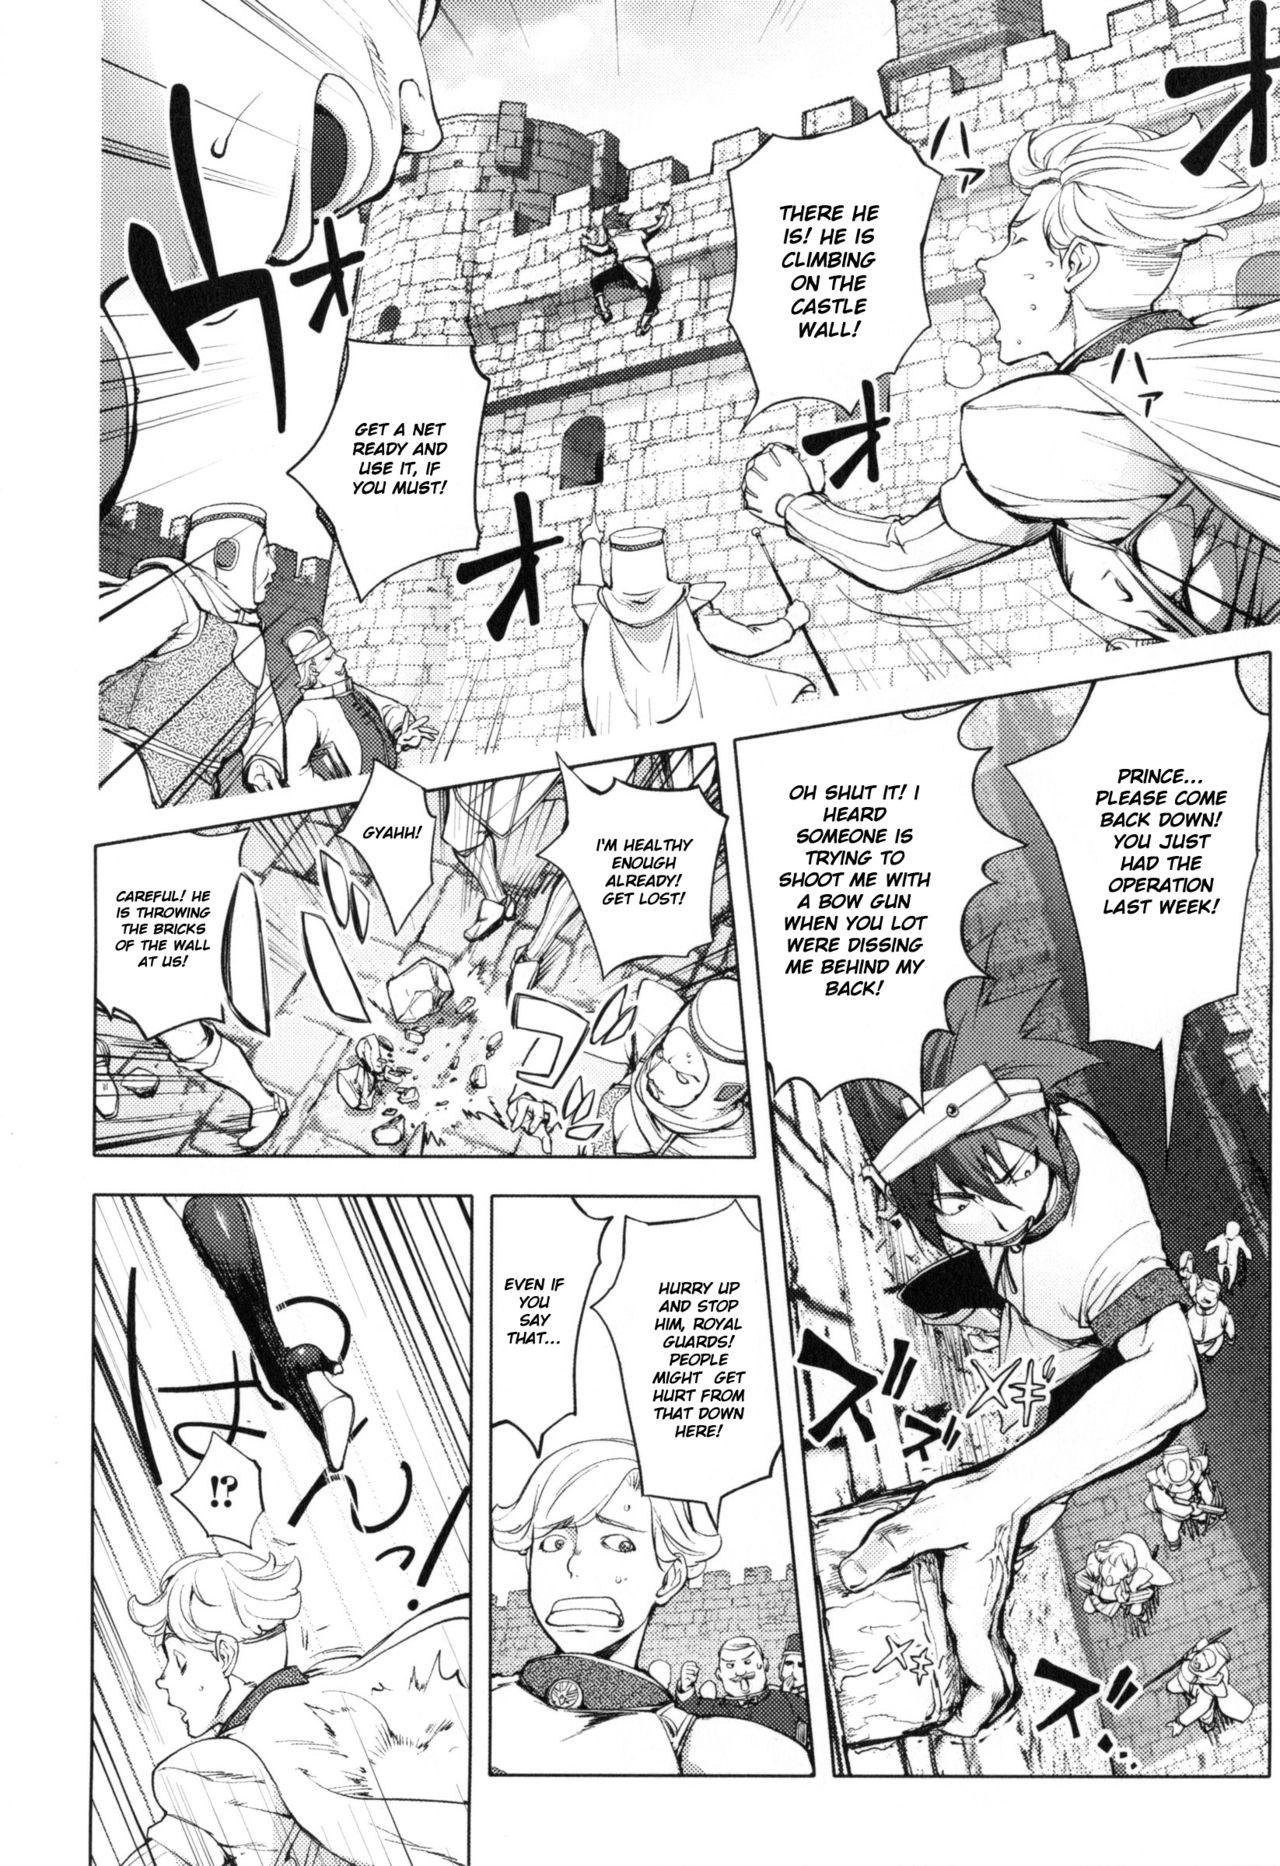 X Snake Girls 2 | The Adventures Of The Three Heroes: Chapter 6 - Snake Girl Part 2 Enema - Picture 1